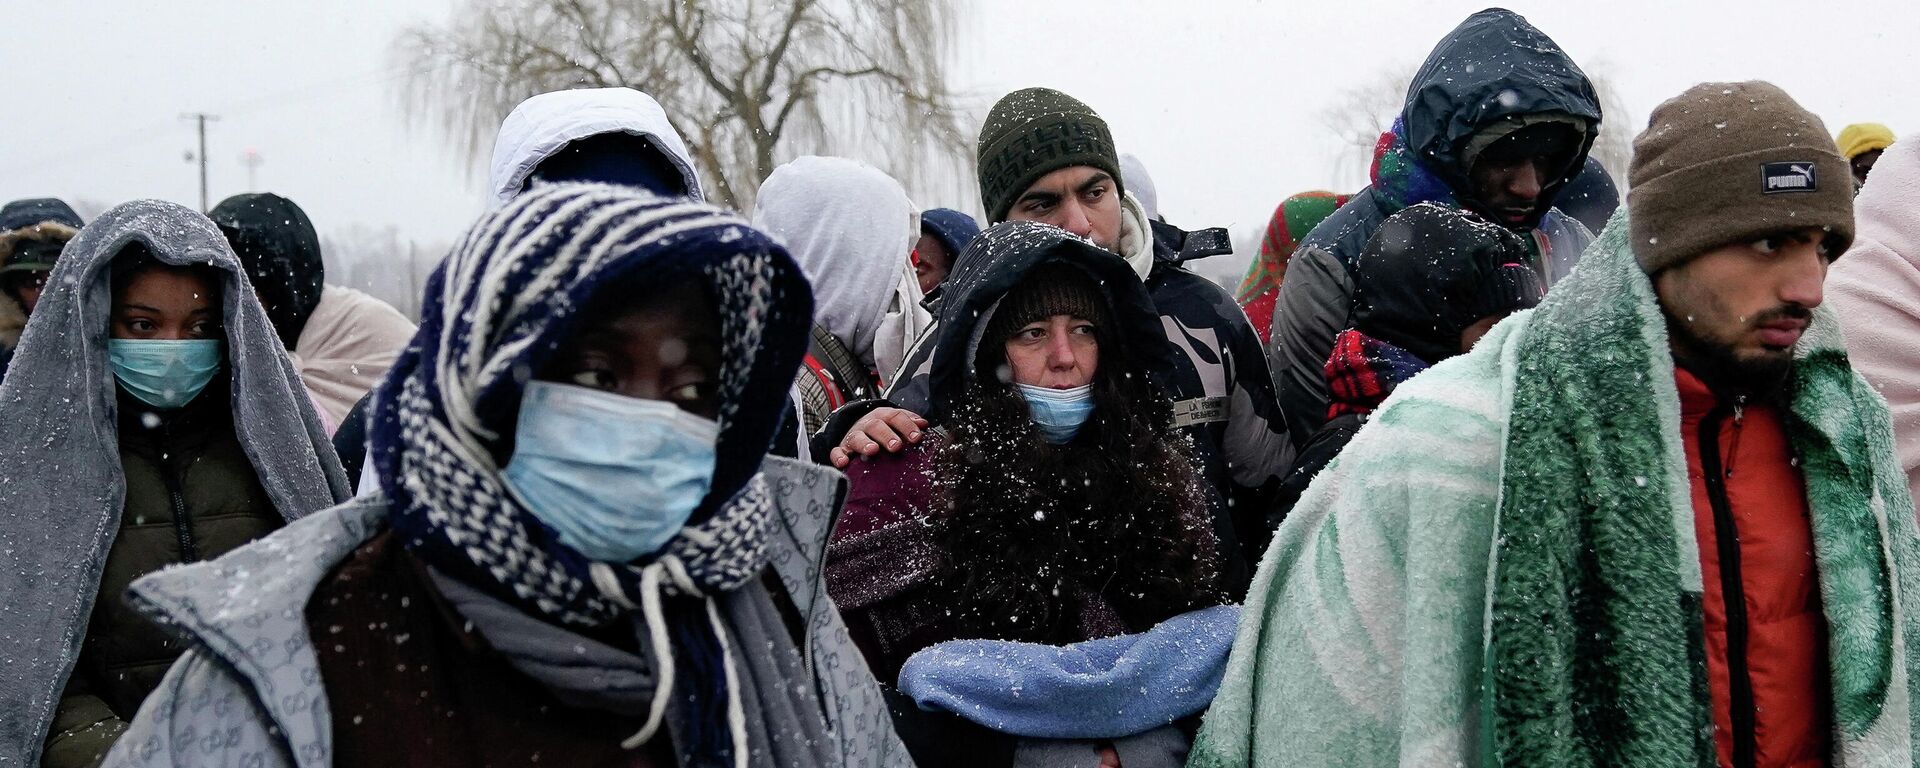 People who have fled Ukraine  wait for a bus to transport them away from the border crossing in Medyka, Poland, February 28, 2022 - Sputnik International, 1920, 28.02.2022